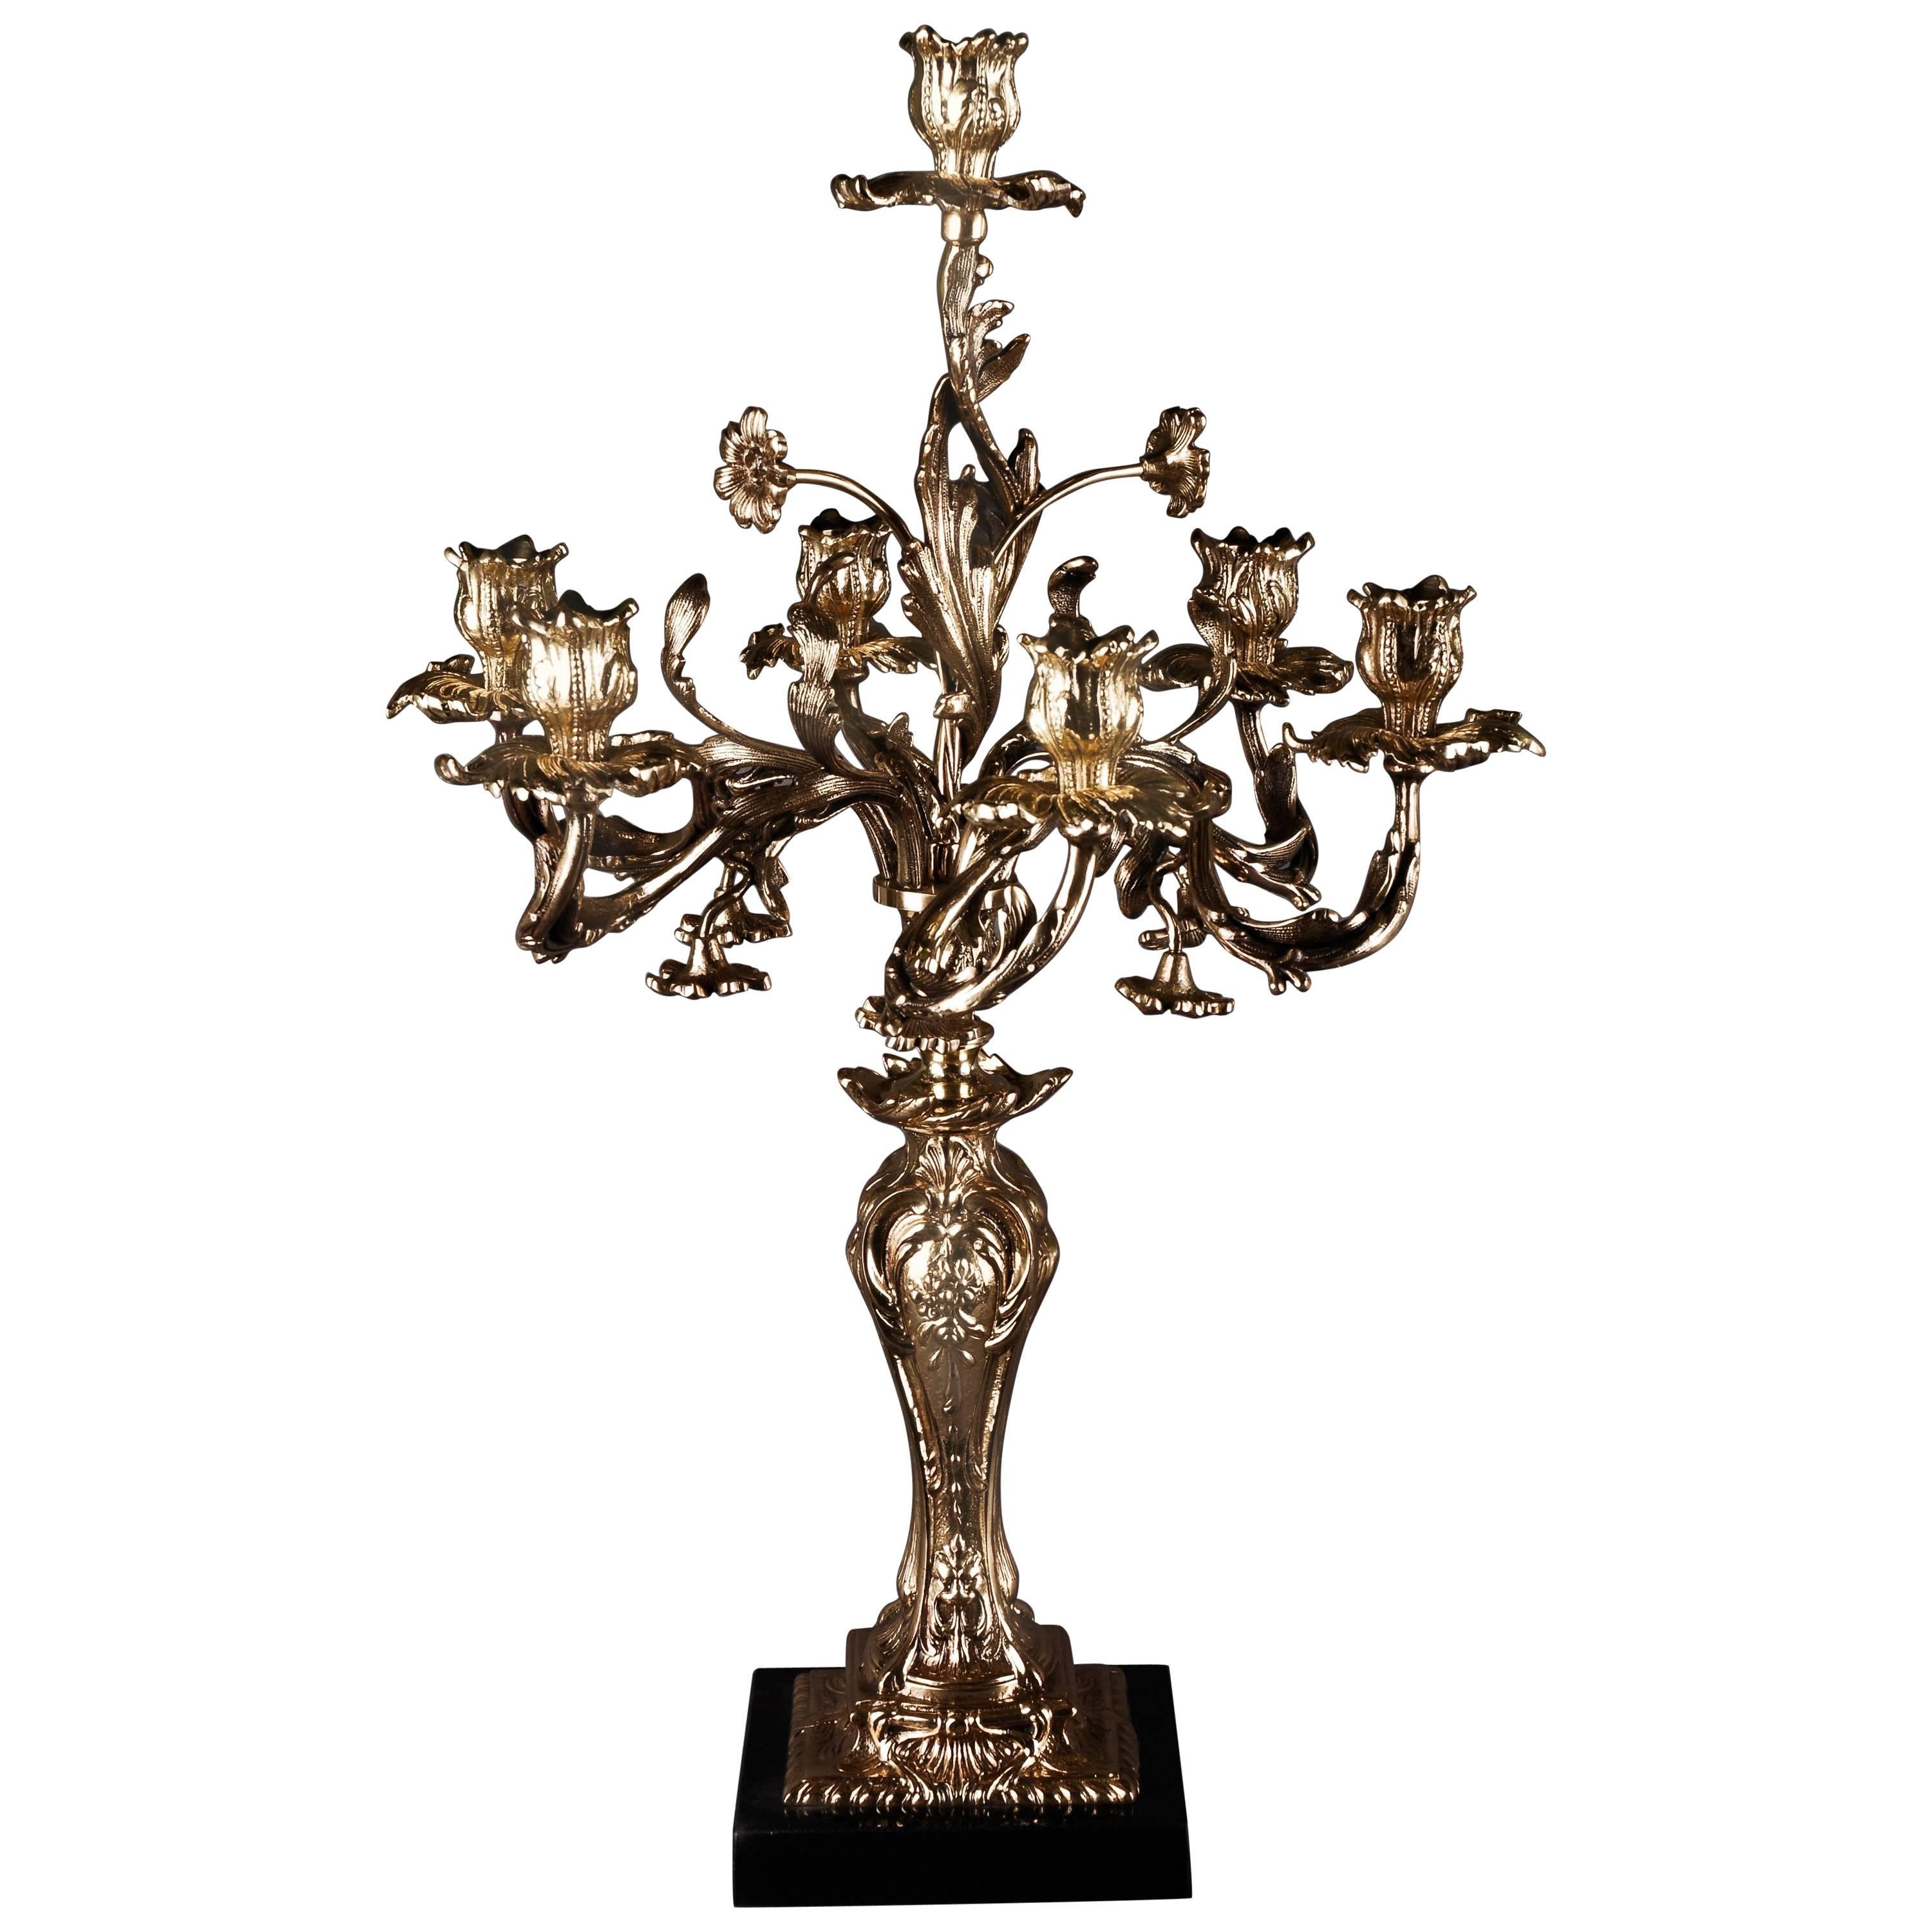 Exquisite Candelabra in Rococo Style